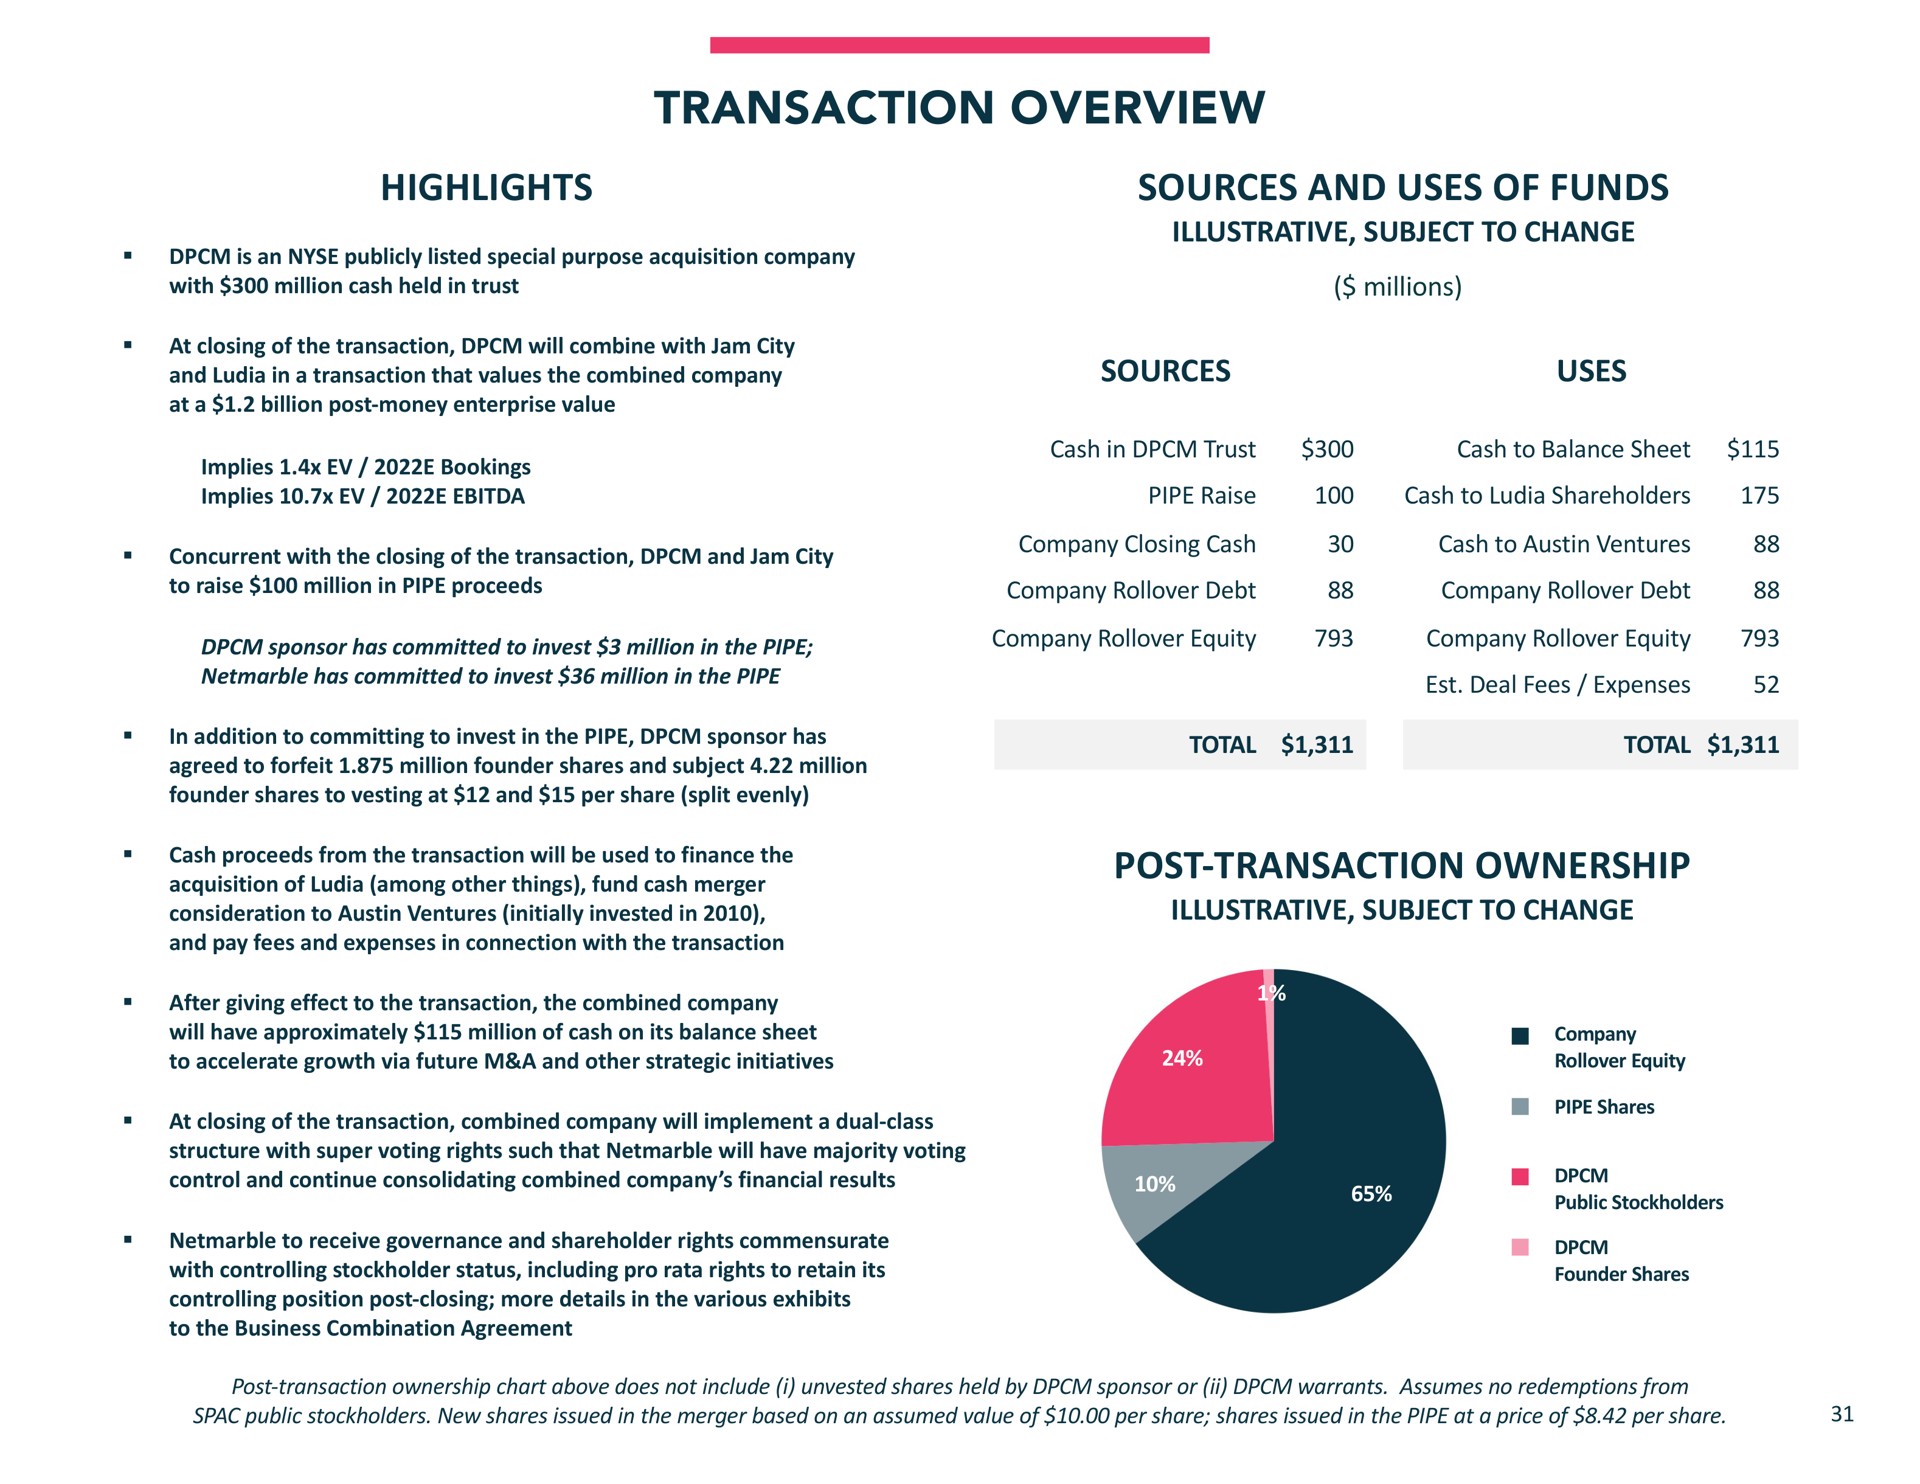 transaction overview highlights is an publicly listed special purpose acquisition company with million cash held in trust at closing of the transaction will combine with jam city and in a transaction that values the combined company at a billion post money enterprise value implies bookings implies concurrent with the closing of the transaction and jam city to raise million in pipe proceeds sponsor has committed to invest million in the pipe has committed to invest million in the pipe in addition to committing to invest in the pipe sponsor has agreed to forfeit million founder shares and subject million founder shares to vesting at and per share split evenly cash proceeds from the transaction will be used to finance the acquisition of among other things fund cash merger consideration to ventures initially invested in and pay fees and expenses in connection with the transaction after giving effect to the transaction the combined company will have approximately million of cash on its balance sheet to accelerate growth via future a and other strategic initiatives at closing of the transaction combined company will implement a dual class structure with super voting rights such that will have majority voting control and continue consolidating combined company financial results to receive governance and shareholder rights commensurate with controlling stockholder status including pro rata rights to retain its controlling position post closing more details in the various exhibits to the business combination agreement sources and uses of funds illustrative subject to change millions sources uses cash in trust cash to balance sheet pipe raise cash to shareholders company closing cash company debt cash to ventures company debt company equity company equity deal fees expenses total total post transaction ownership illustrative subject to change post transaction ownership chart above does not include i unvested shares held by sponsor or warrants assumes no redemptions from public stockholders new shares issued in the merger based on an assumed value of per share shares issued in the pipe at a price of per share | Jam City